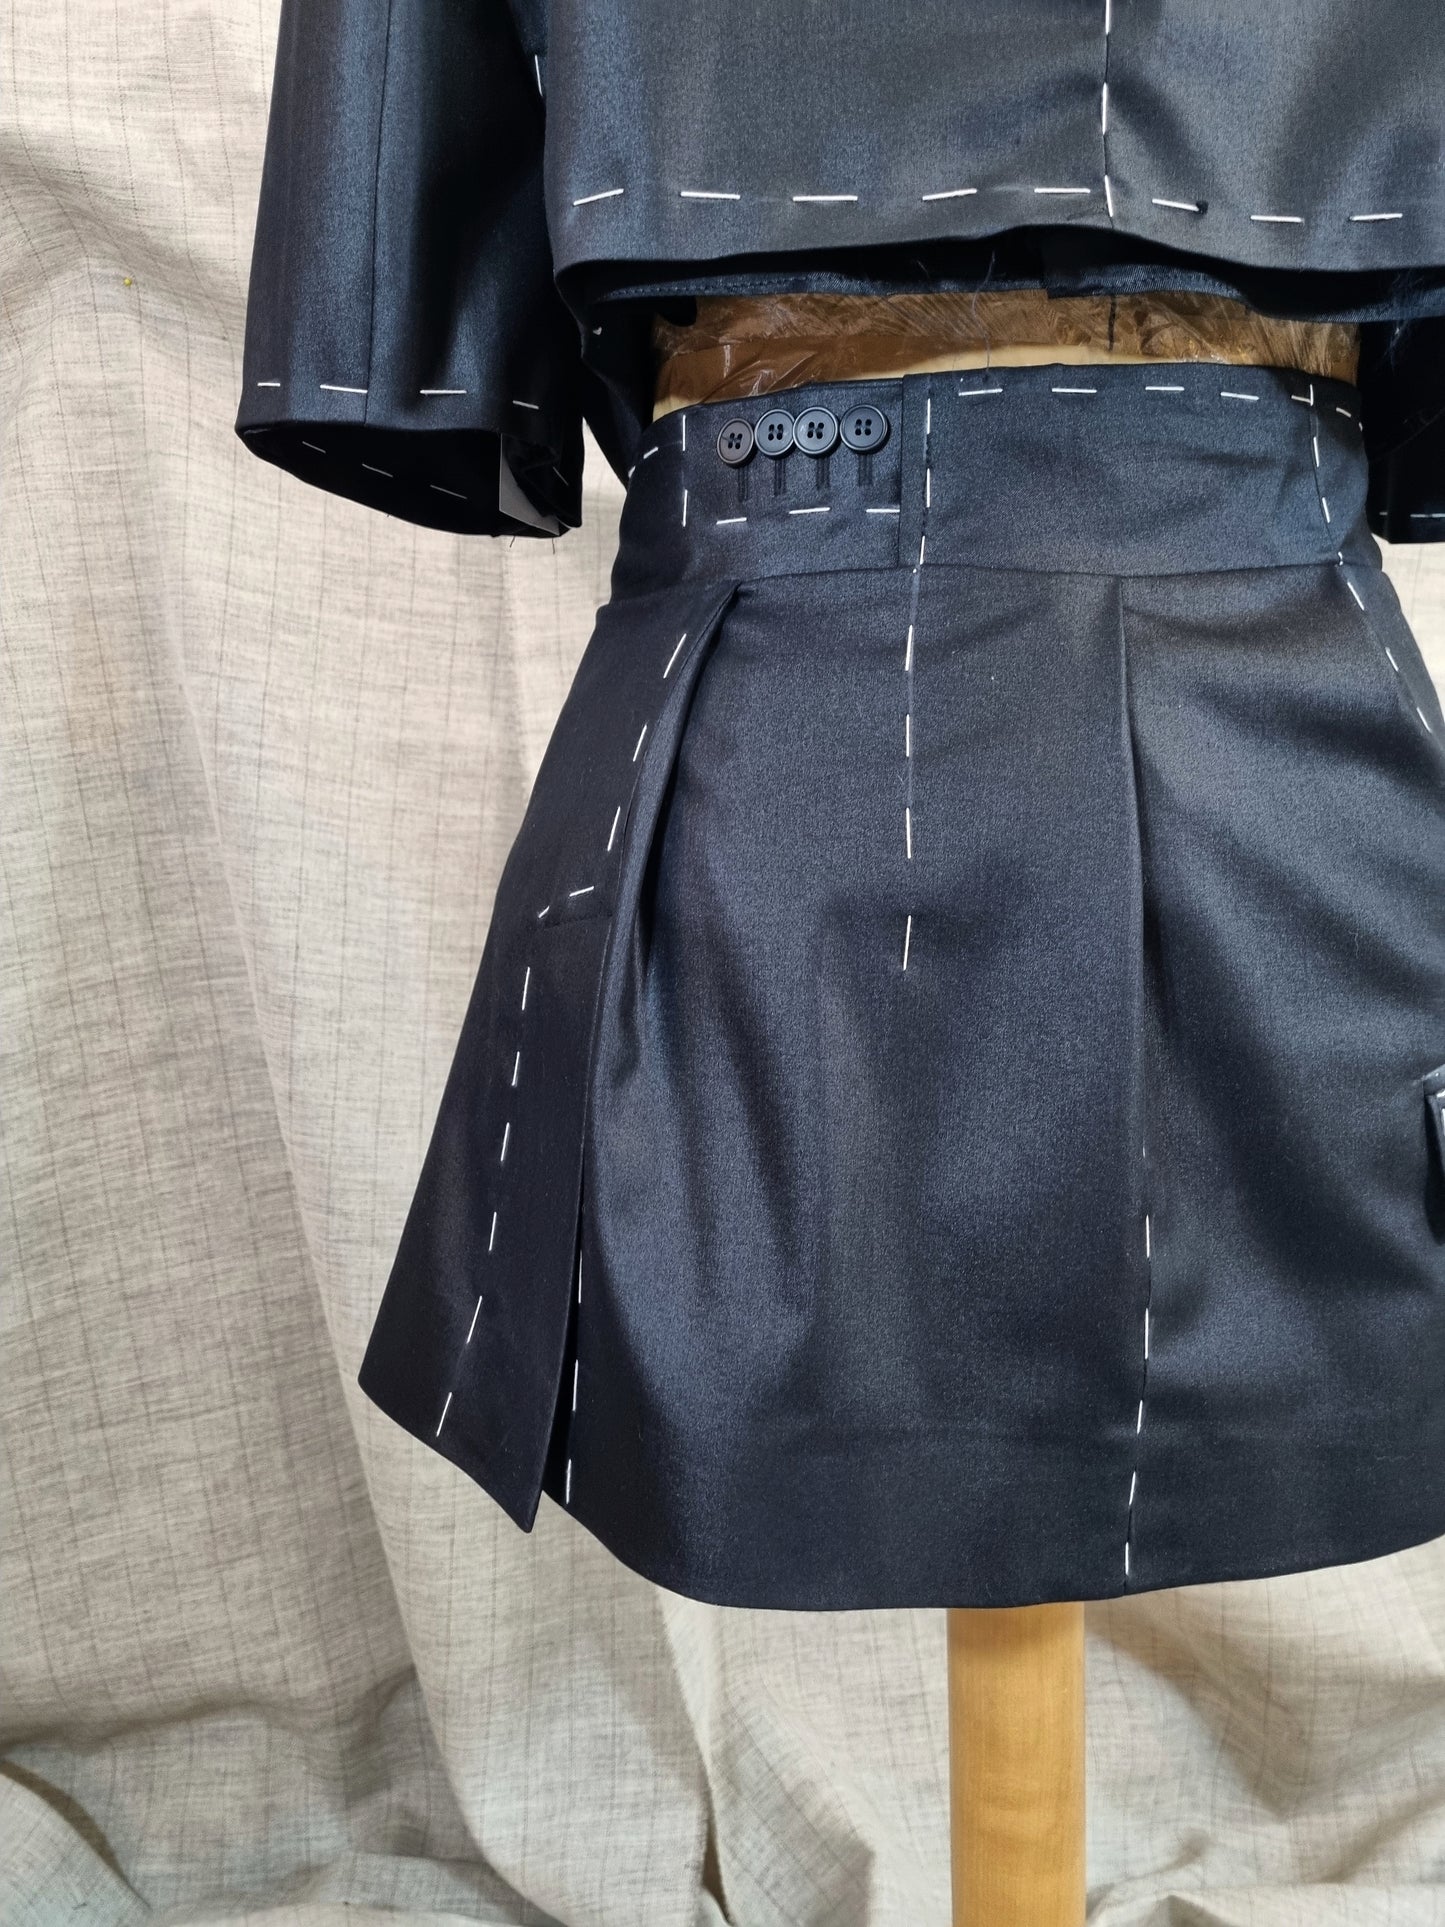 Cropped Jacket And Skirt With Handmade Decorative Stitching